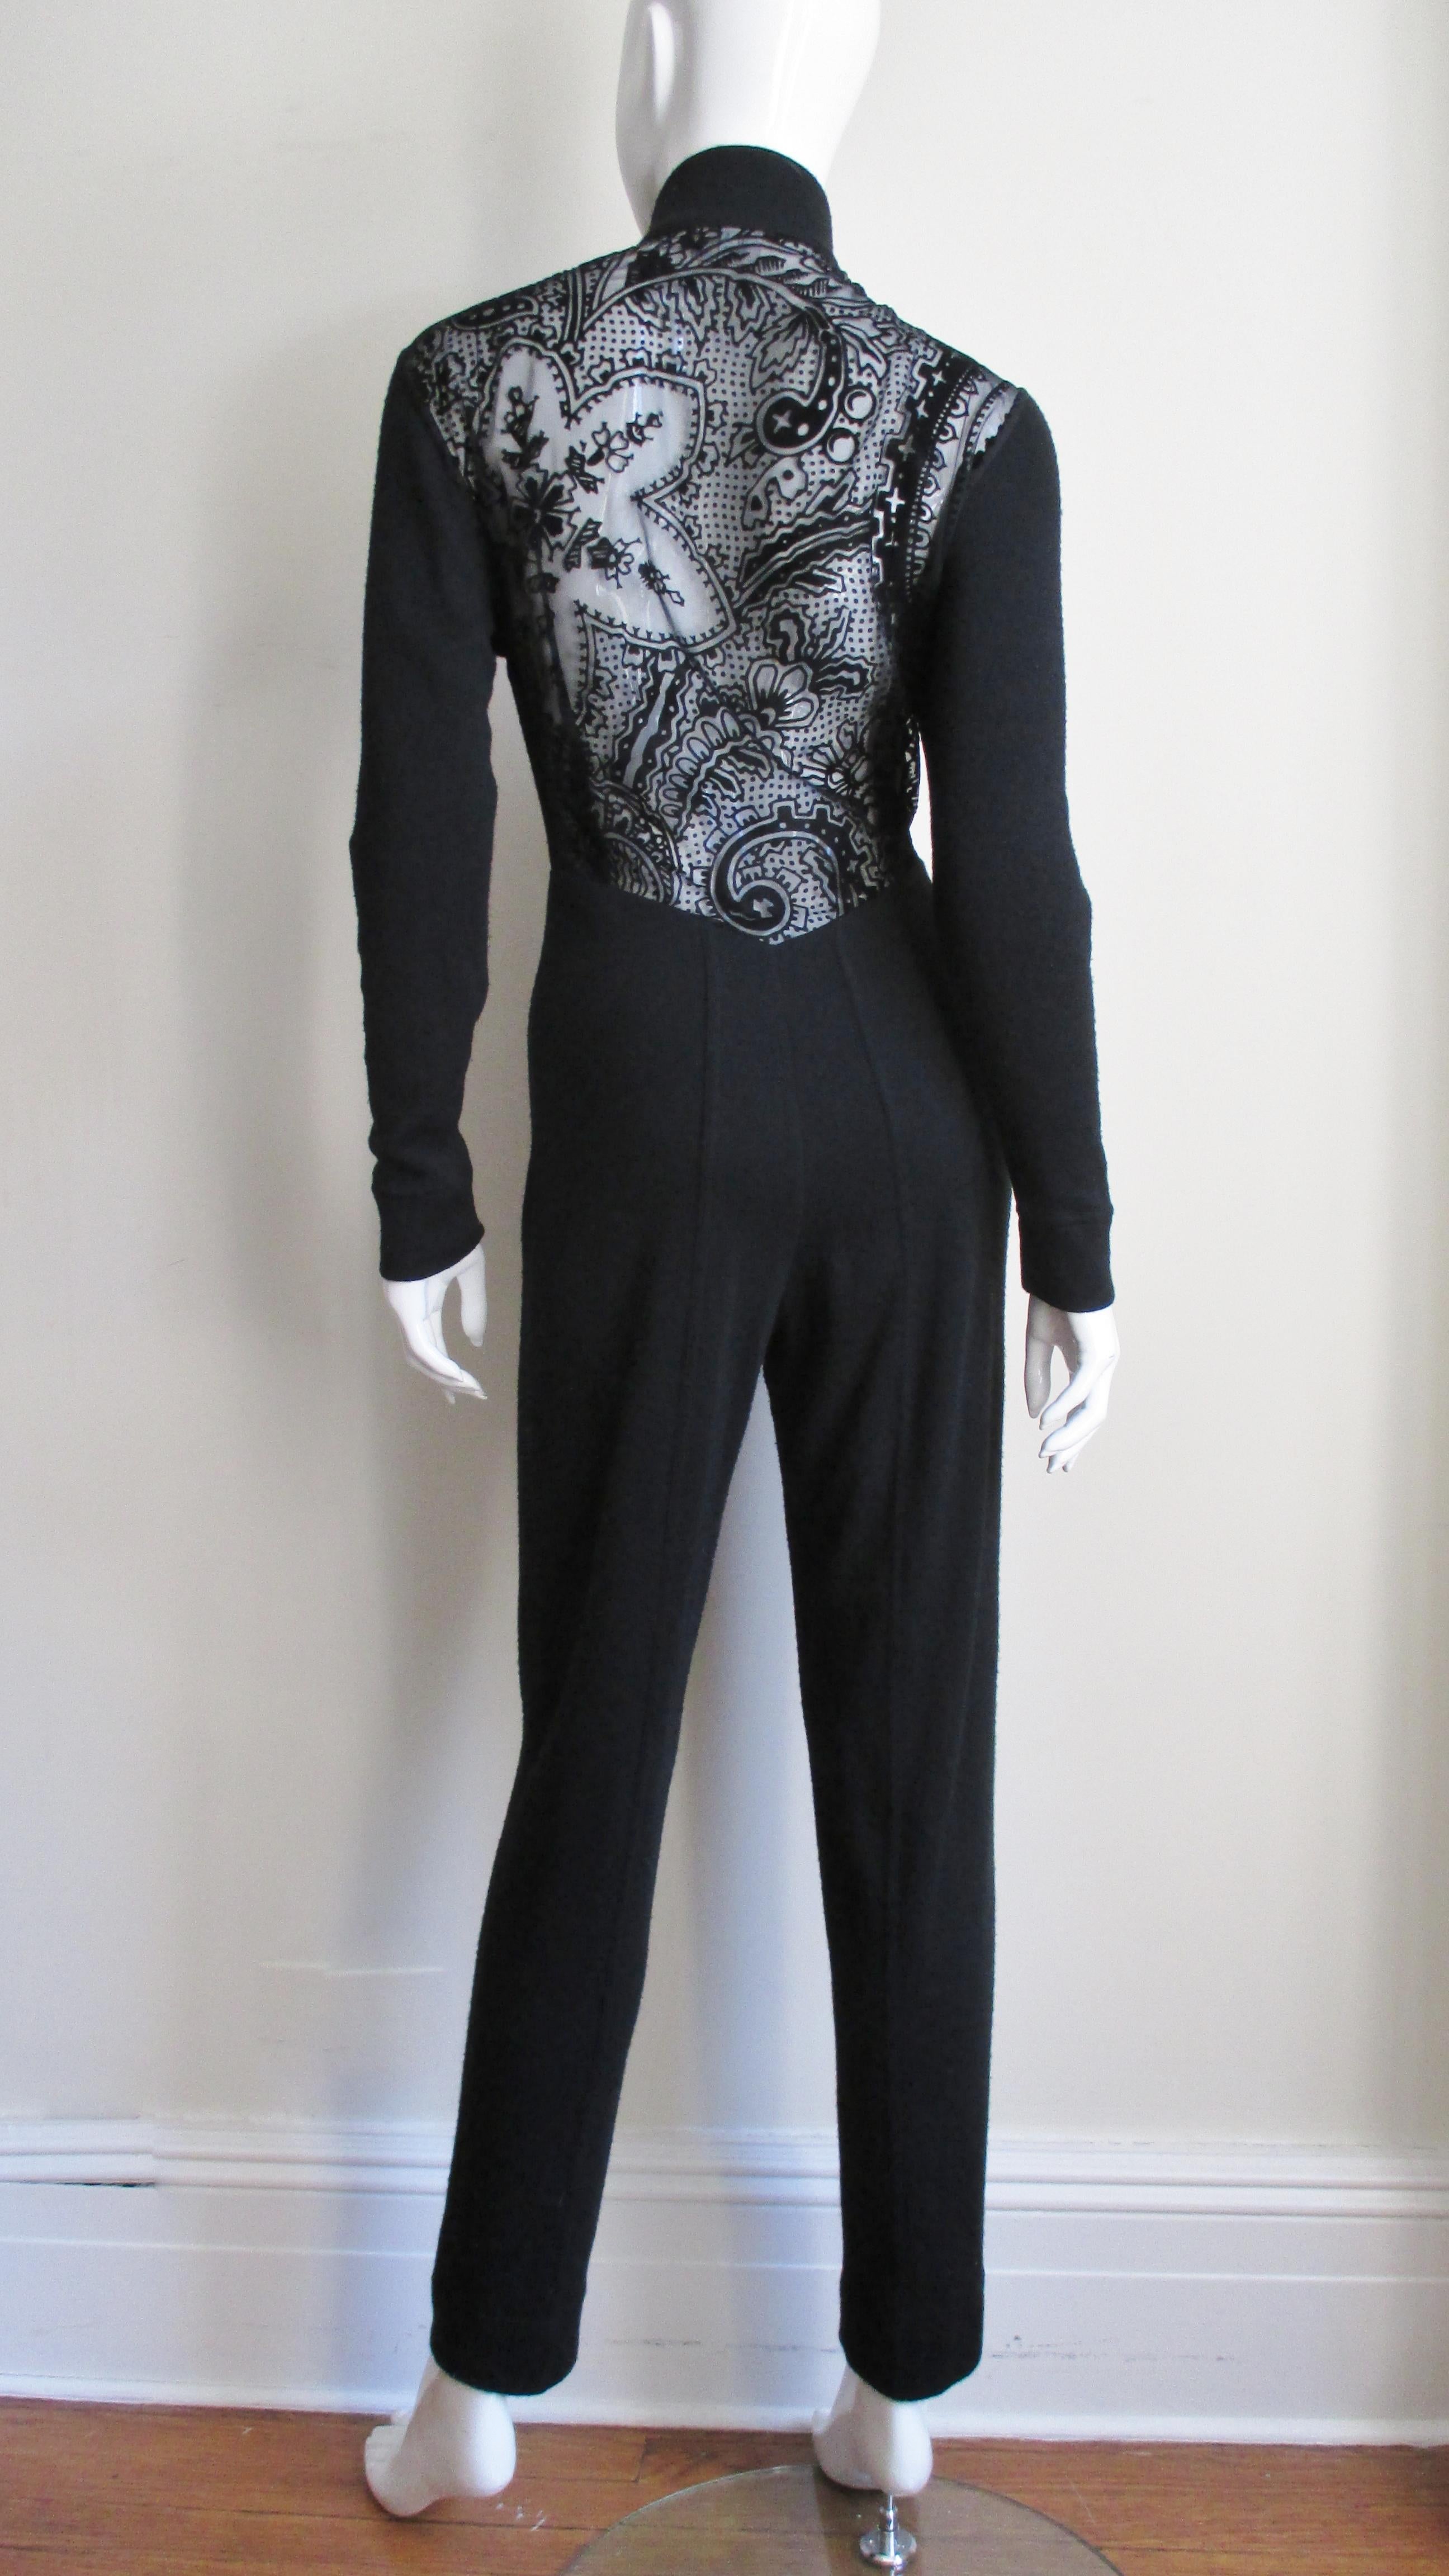 A fabulous black wool jersey catsuit jumpsuit from Byblos.  It is fitted with long sleeves, a stand up collar and a front zipper. The back is fabulous, sheer black with a flocked lace pattern.
Fits size Small, Medium.

Bust  34